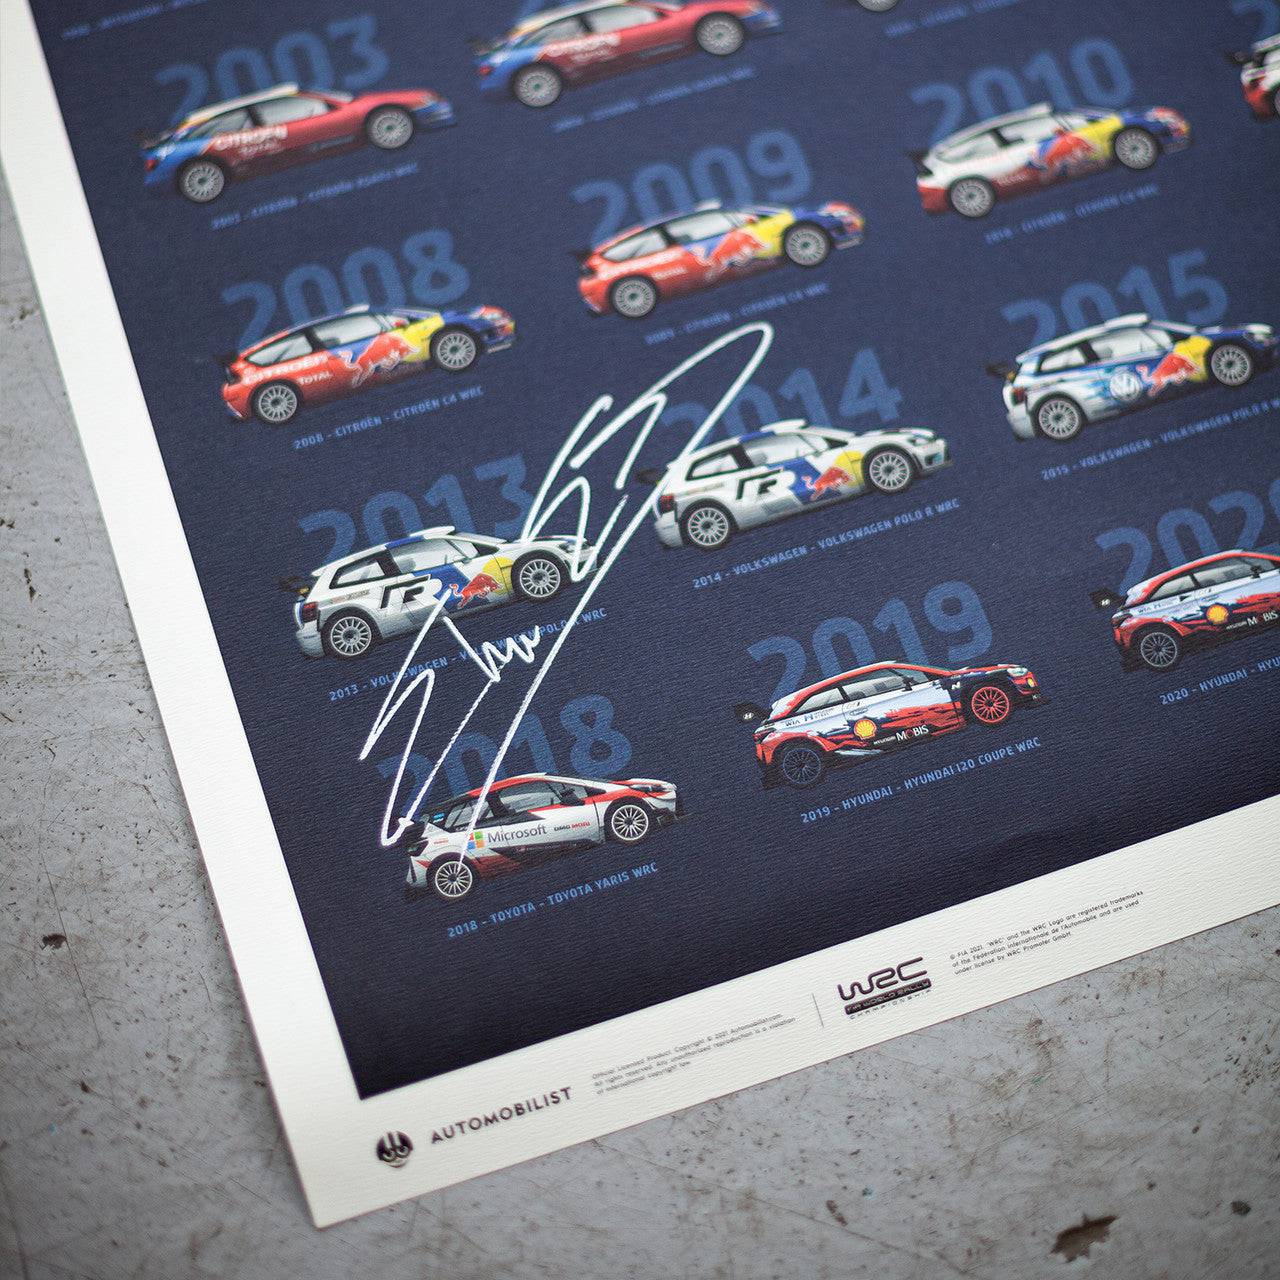 Elfyn Evans - WRC Manufacturers’ Champions 1973-2020 - 48th Anniversary | Signed Limited Edition